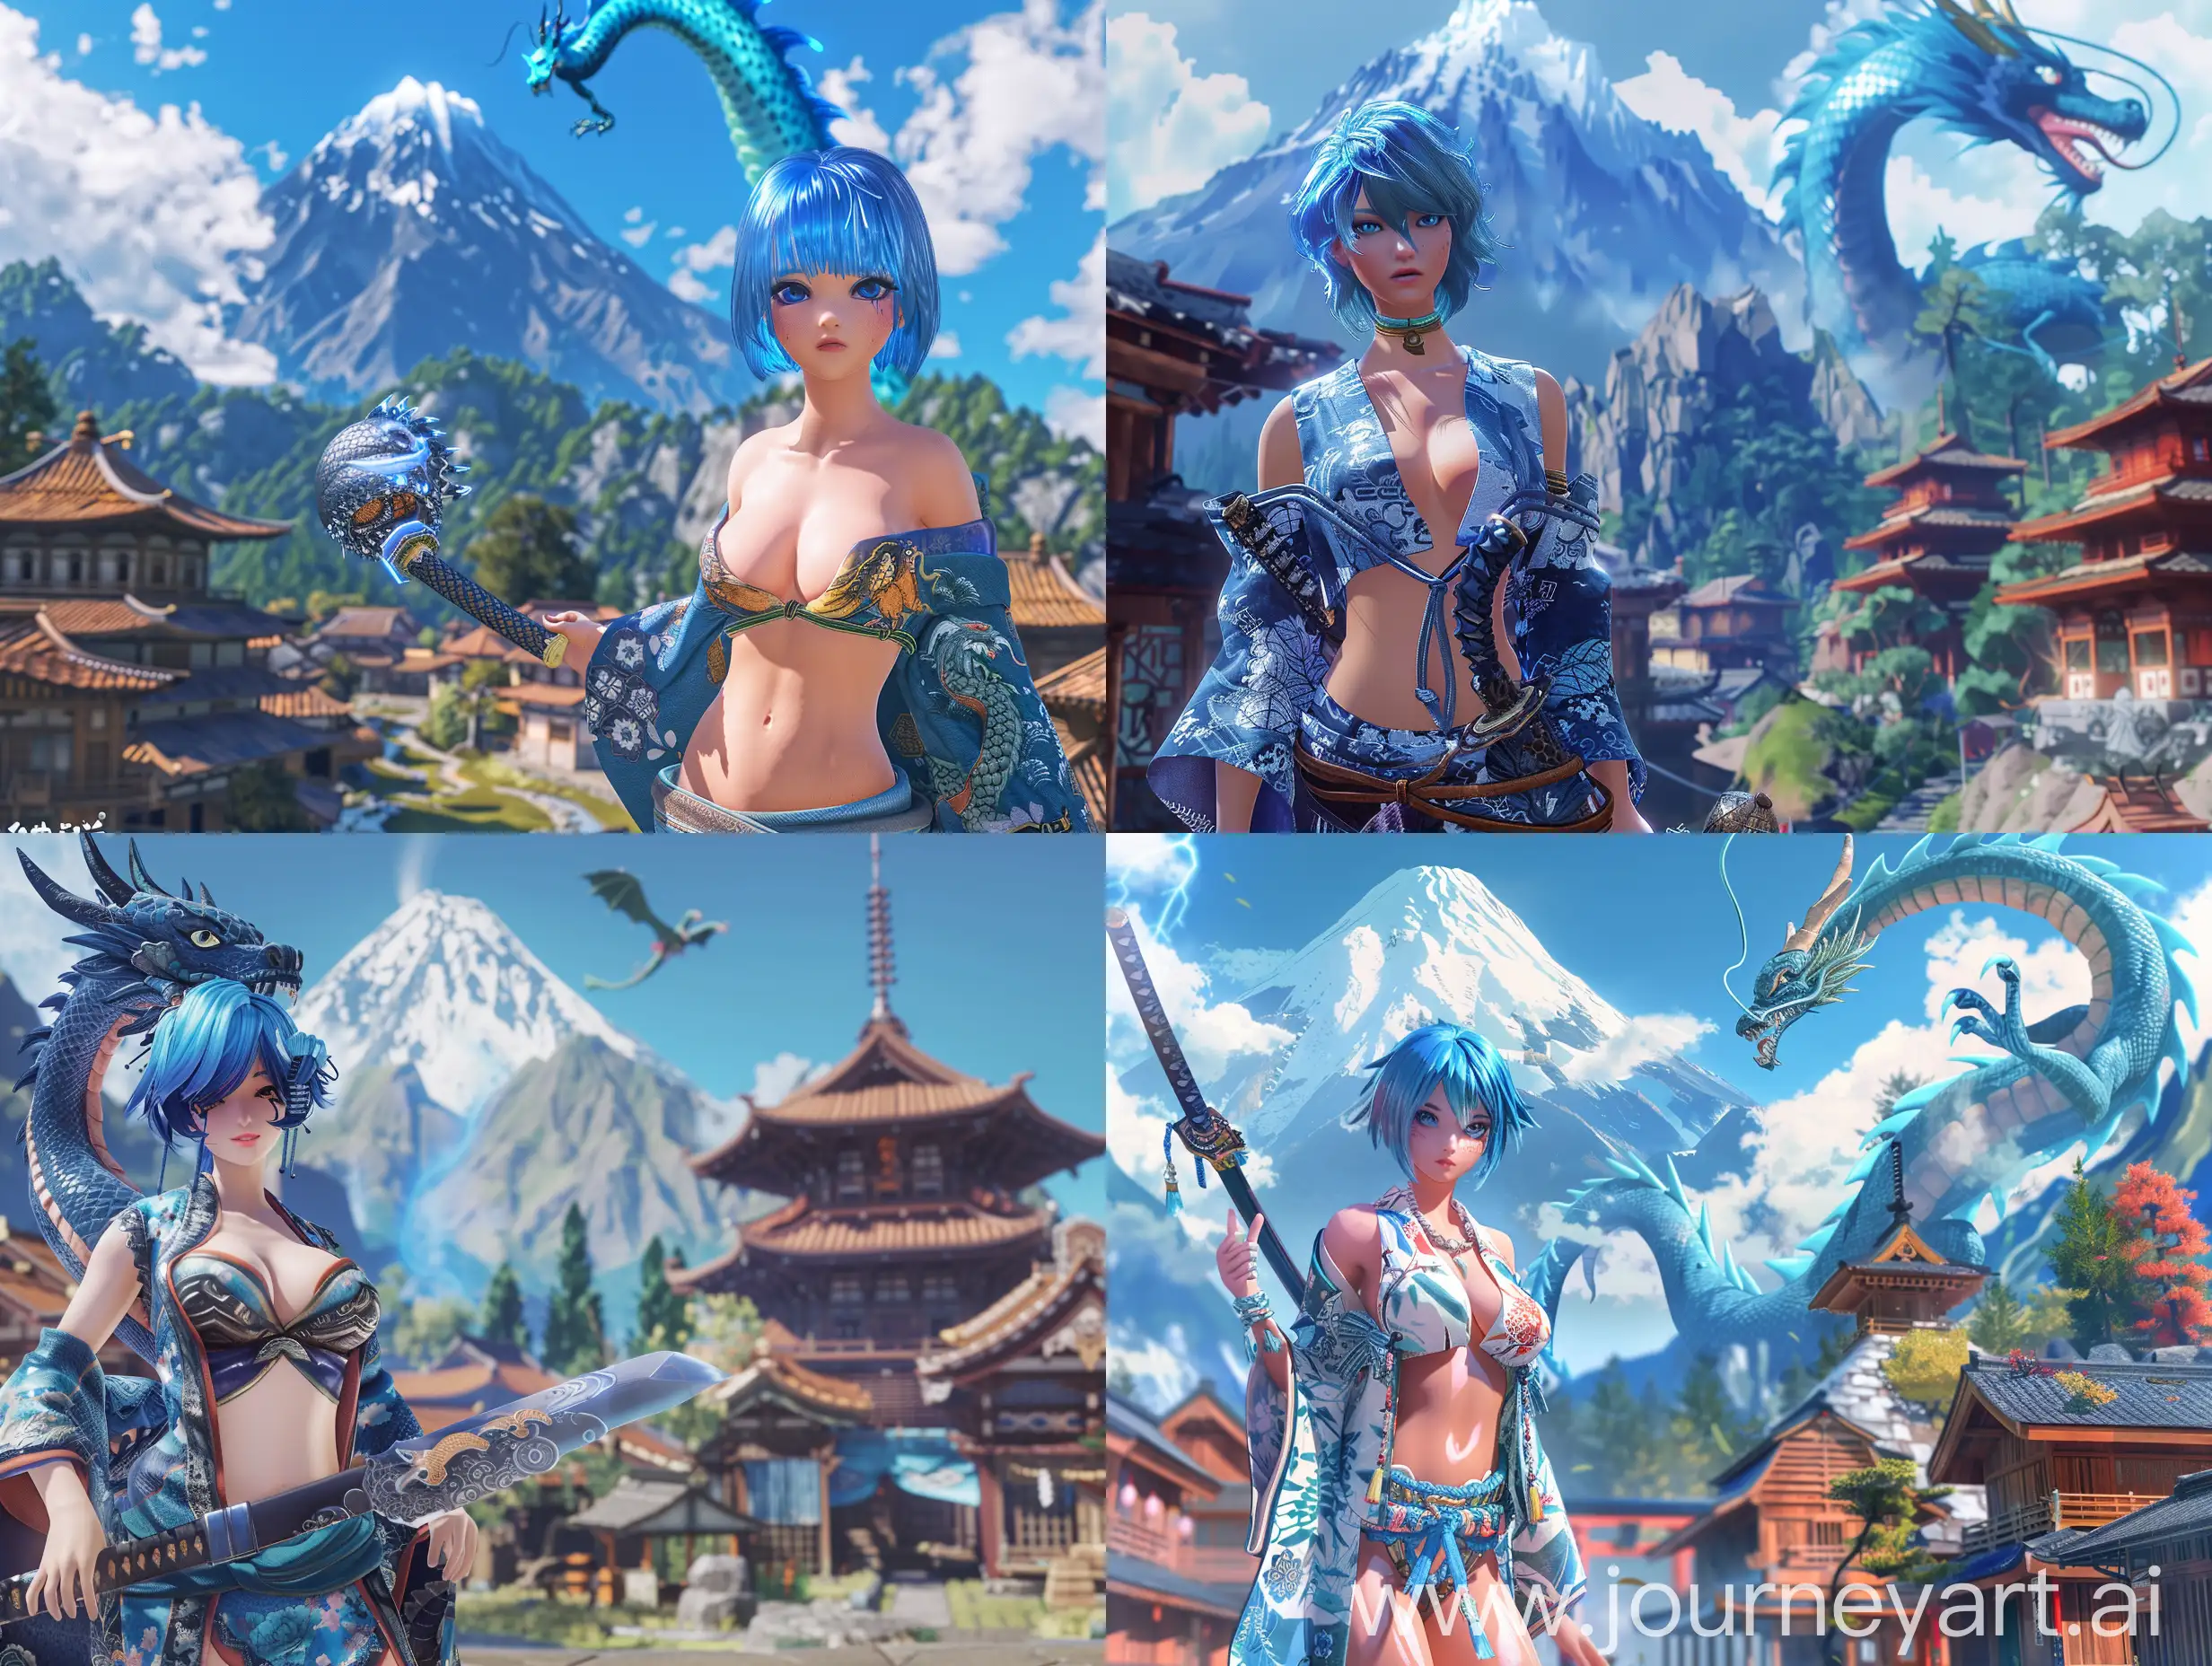 A mountain in the background, a blue dragon in the sky, a village with Far Eastern architecture in the foreground, the full body of a very beautiful Japanese girl wearing a low-cut kimono and holding a large, fantastic sword in her hand. The girl's hair color is blue. The girl should be visible up to her feet without being too prominent. Quality unreal engine 4